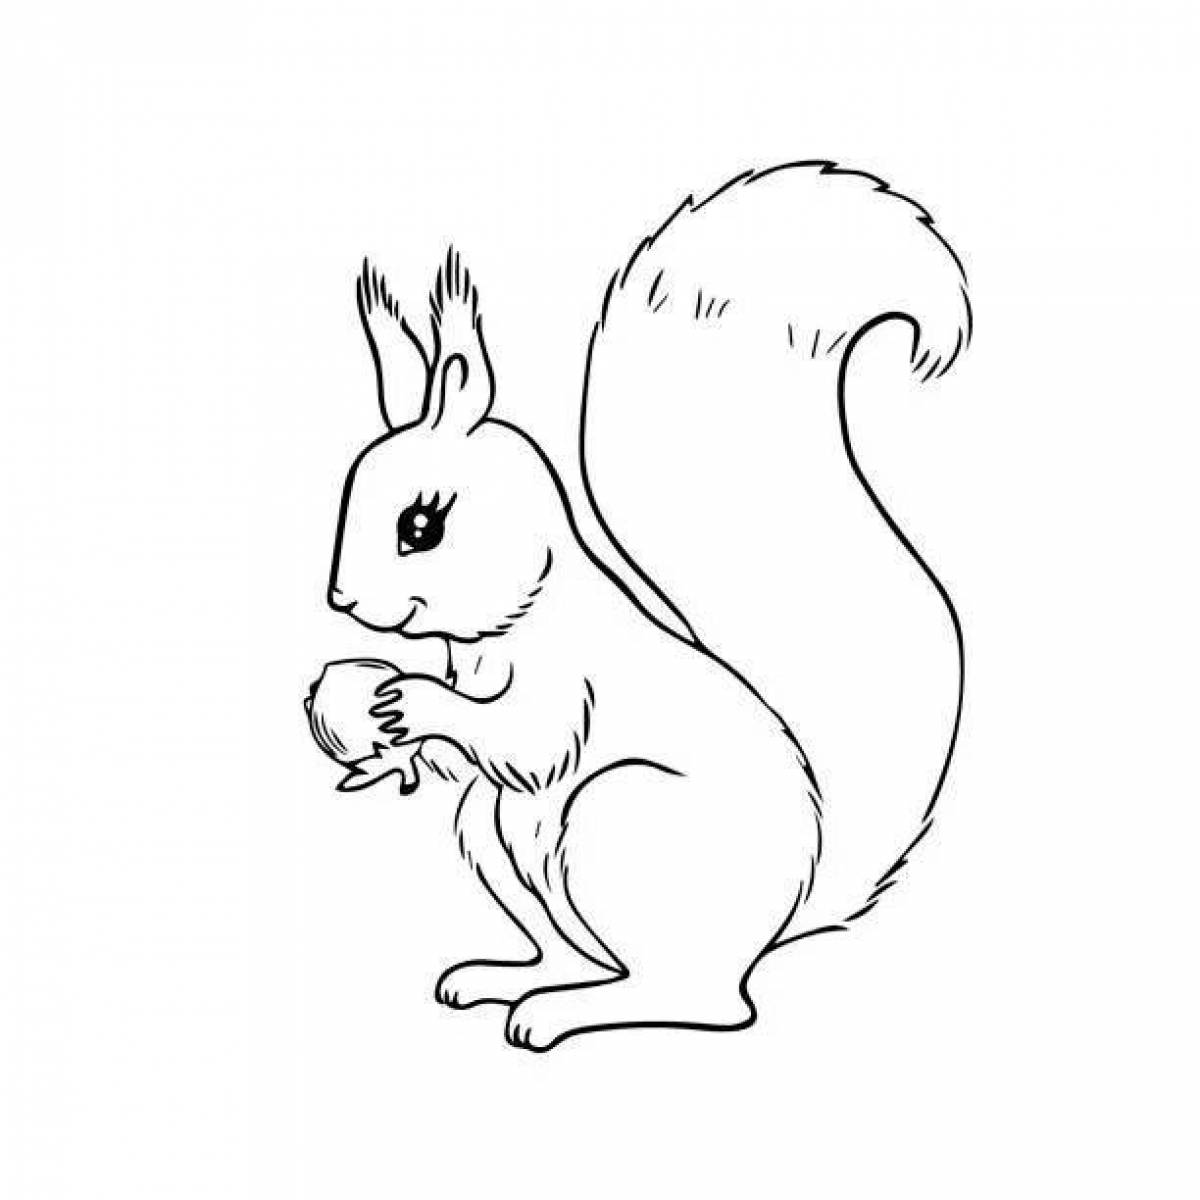 Squirrel with nuts #4